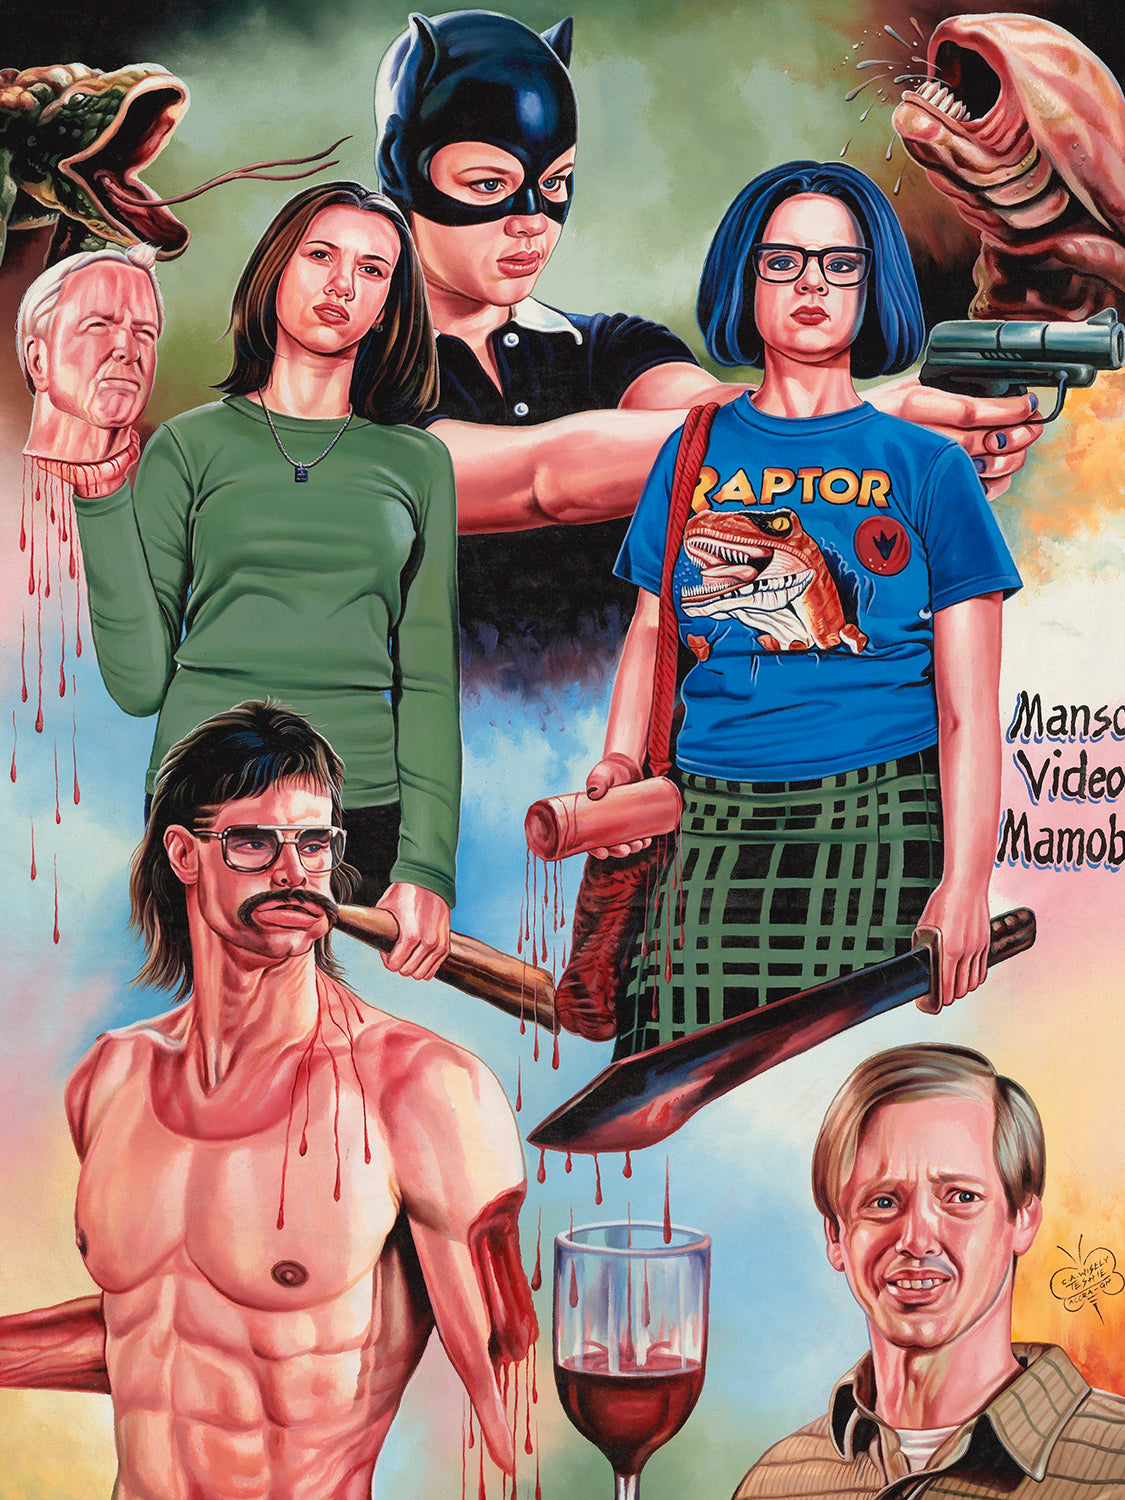 Ghost World - C.A. Wisely